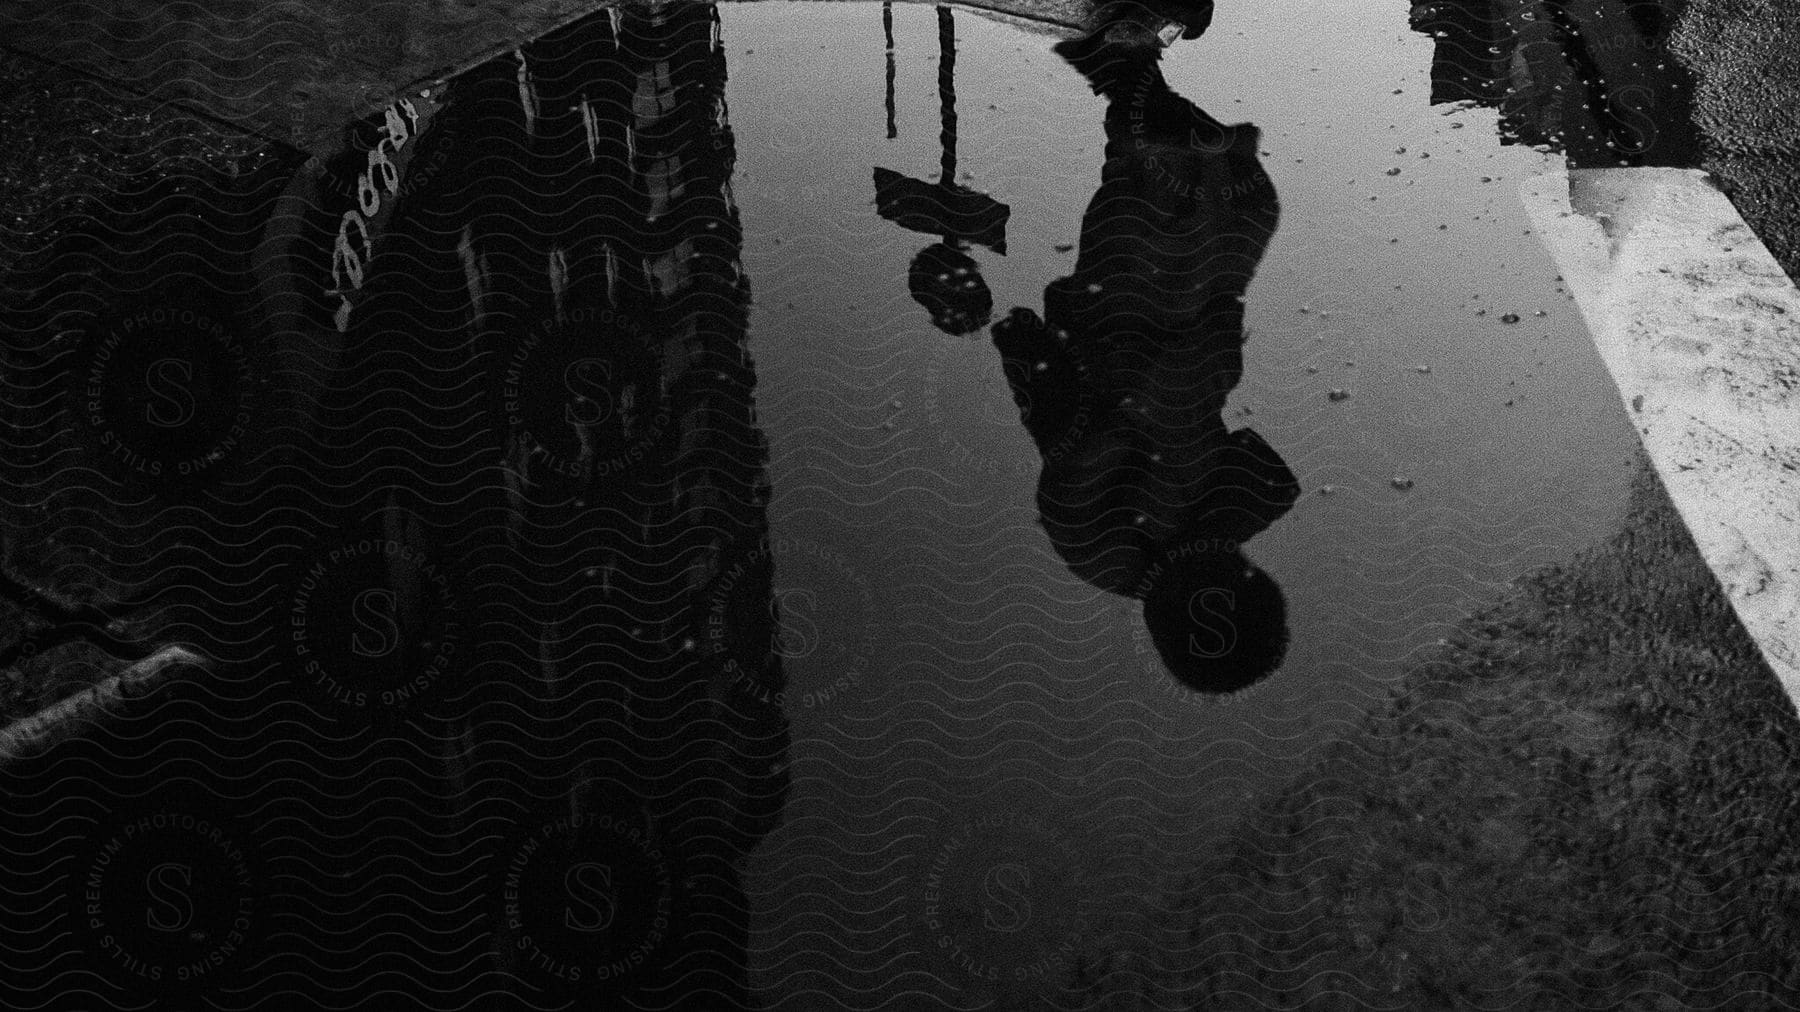 A persons reflection in a puddle on the street reflecting buildings and a street sign